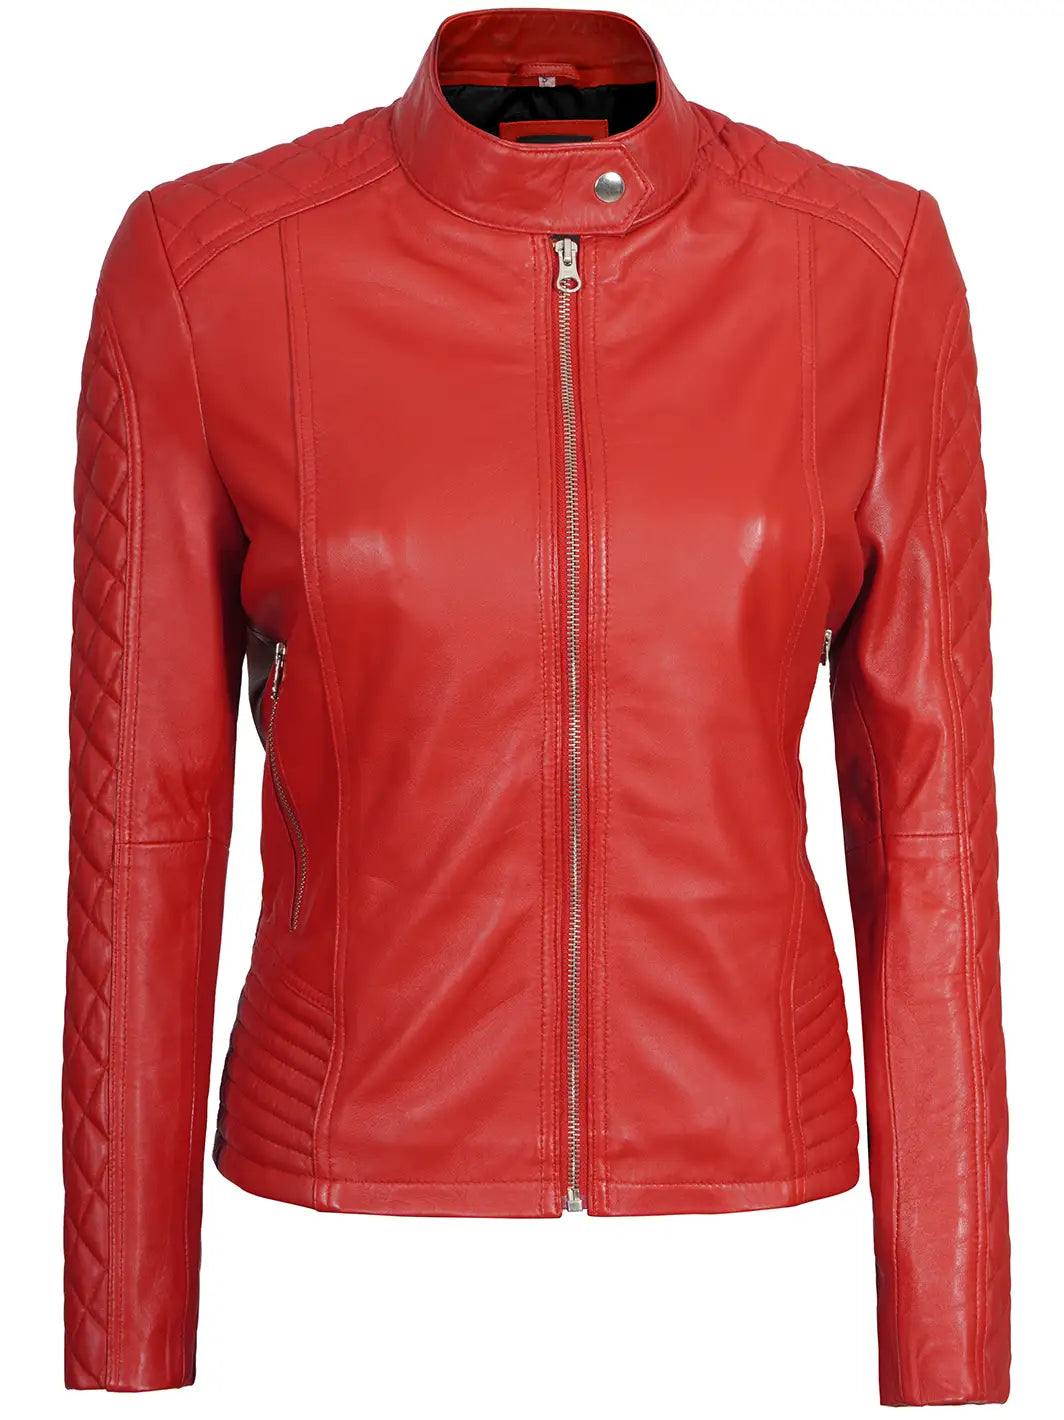 Womens red leather jacket